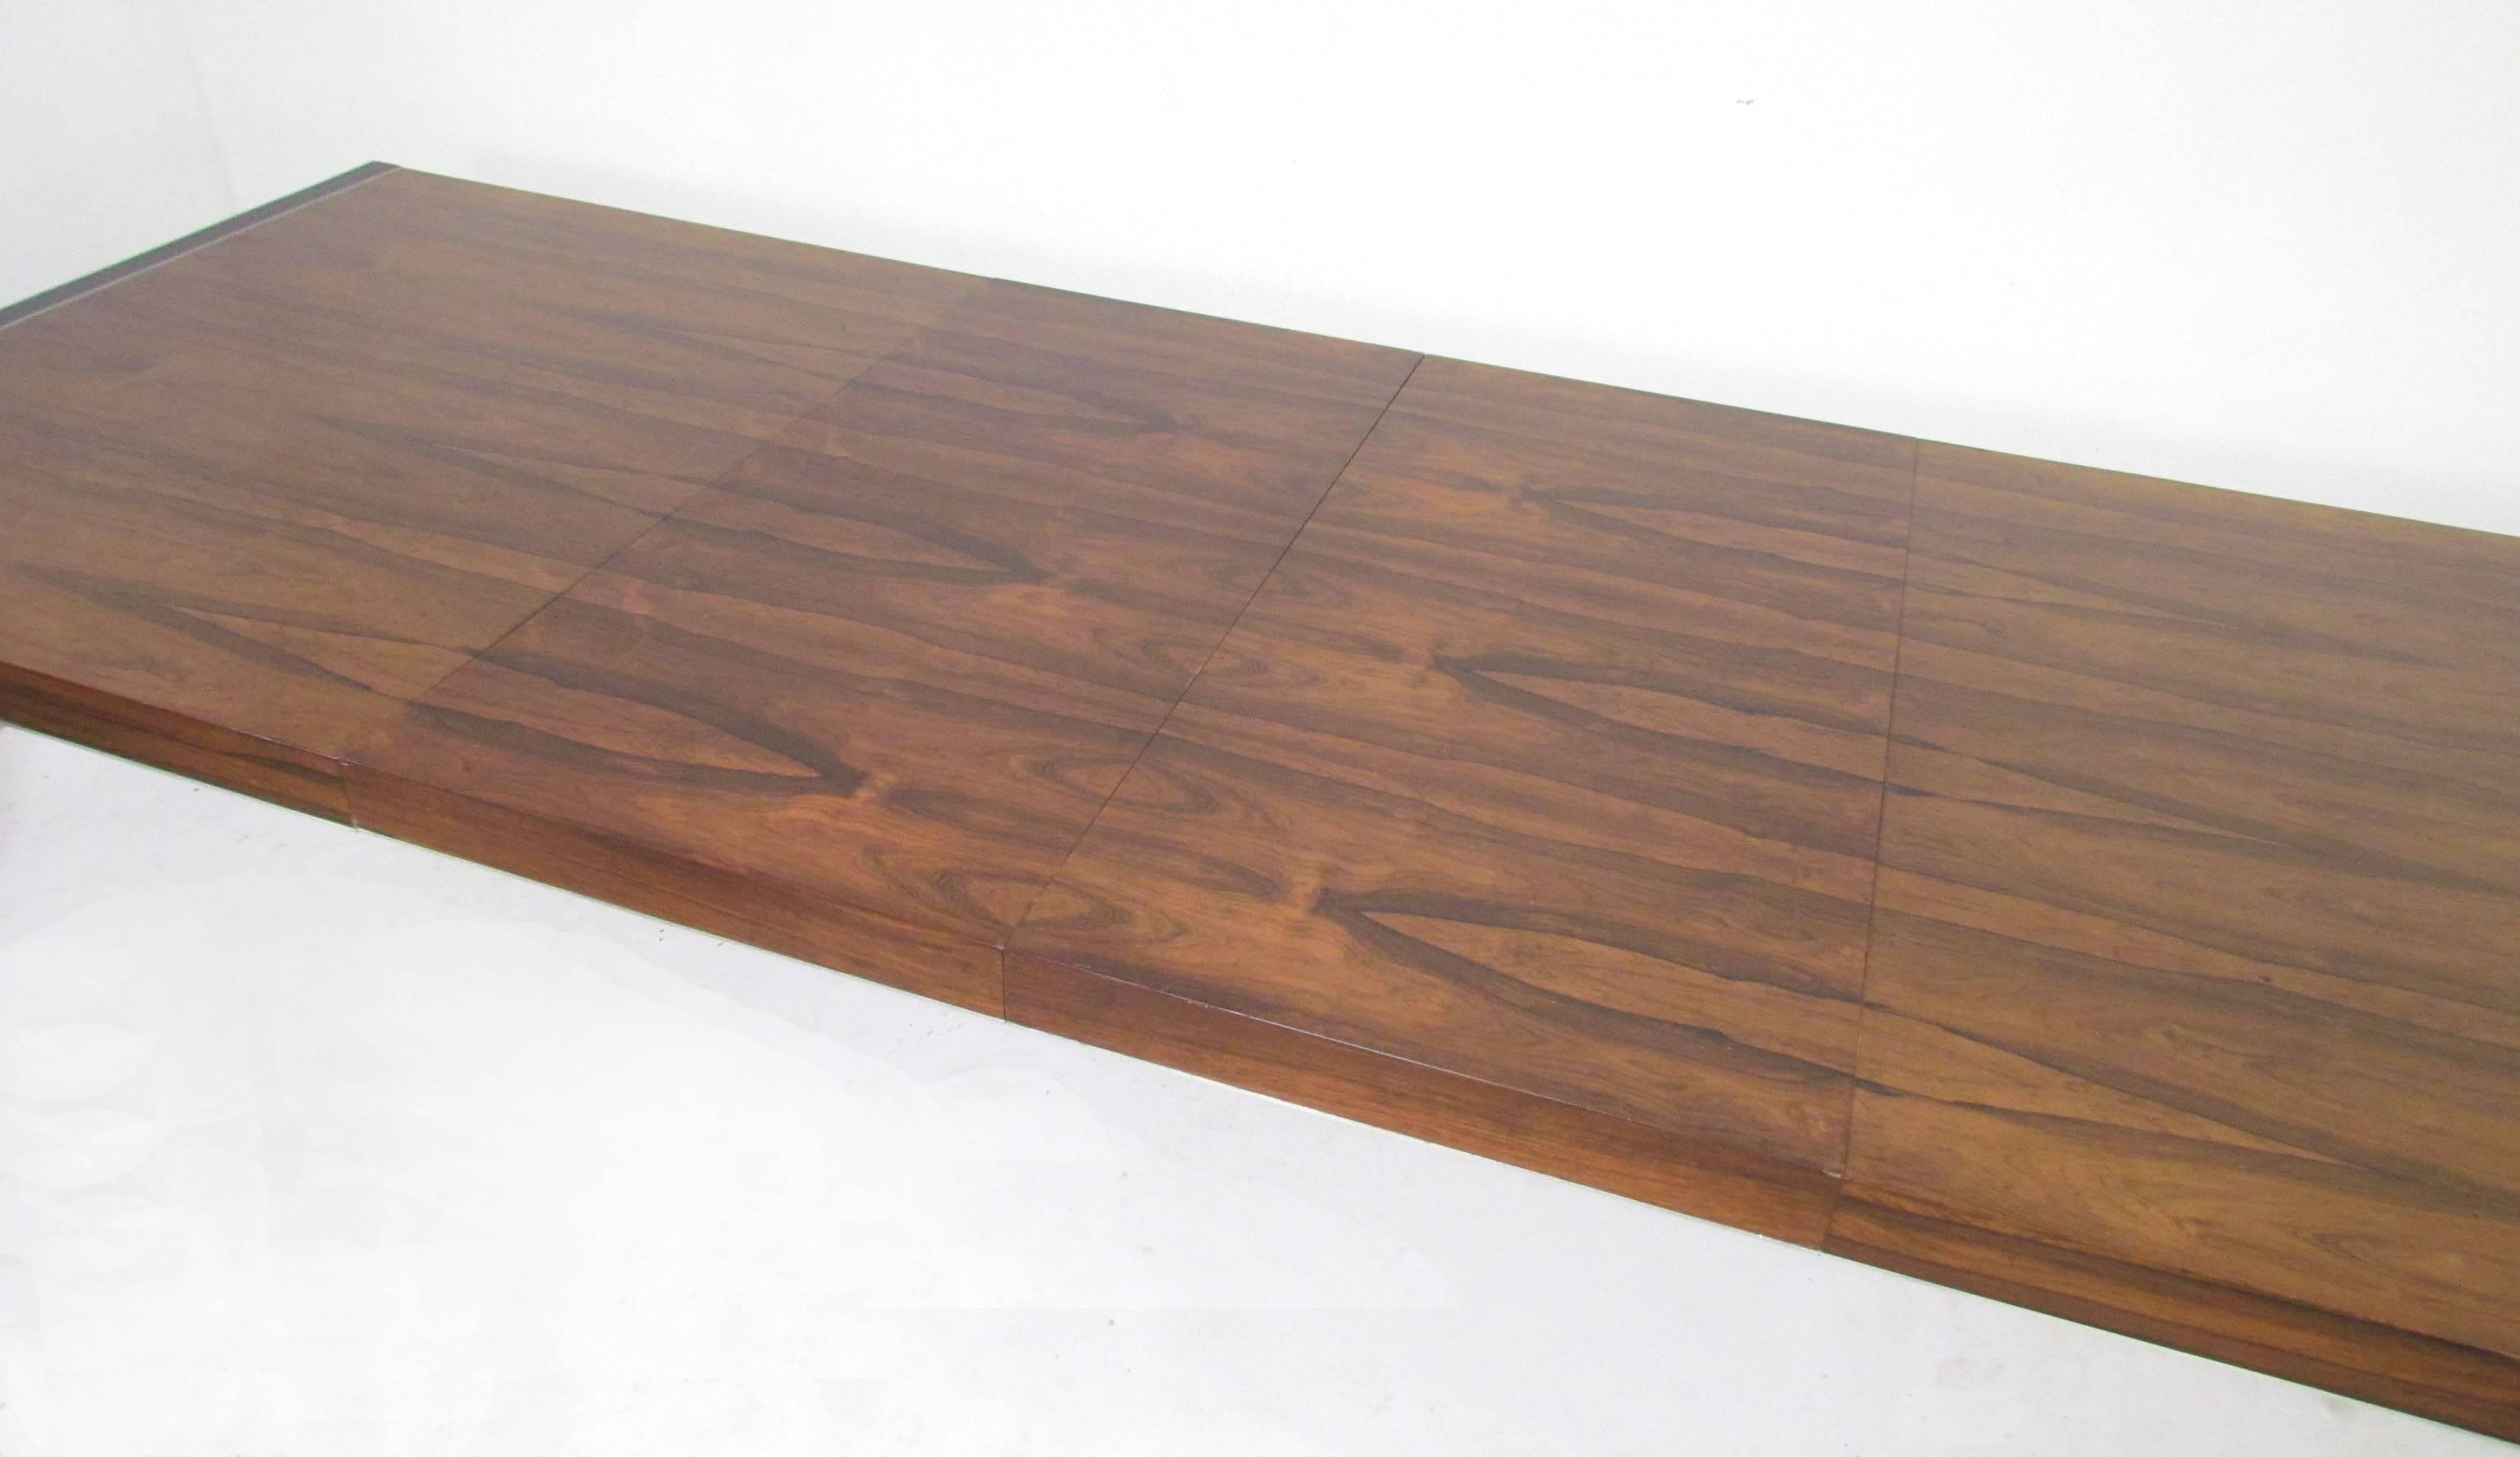 Rosewood Dining Table with Two Leaves by Robert Baron for Glenn of California 1